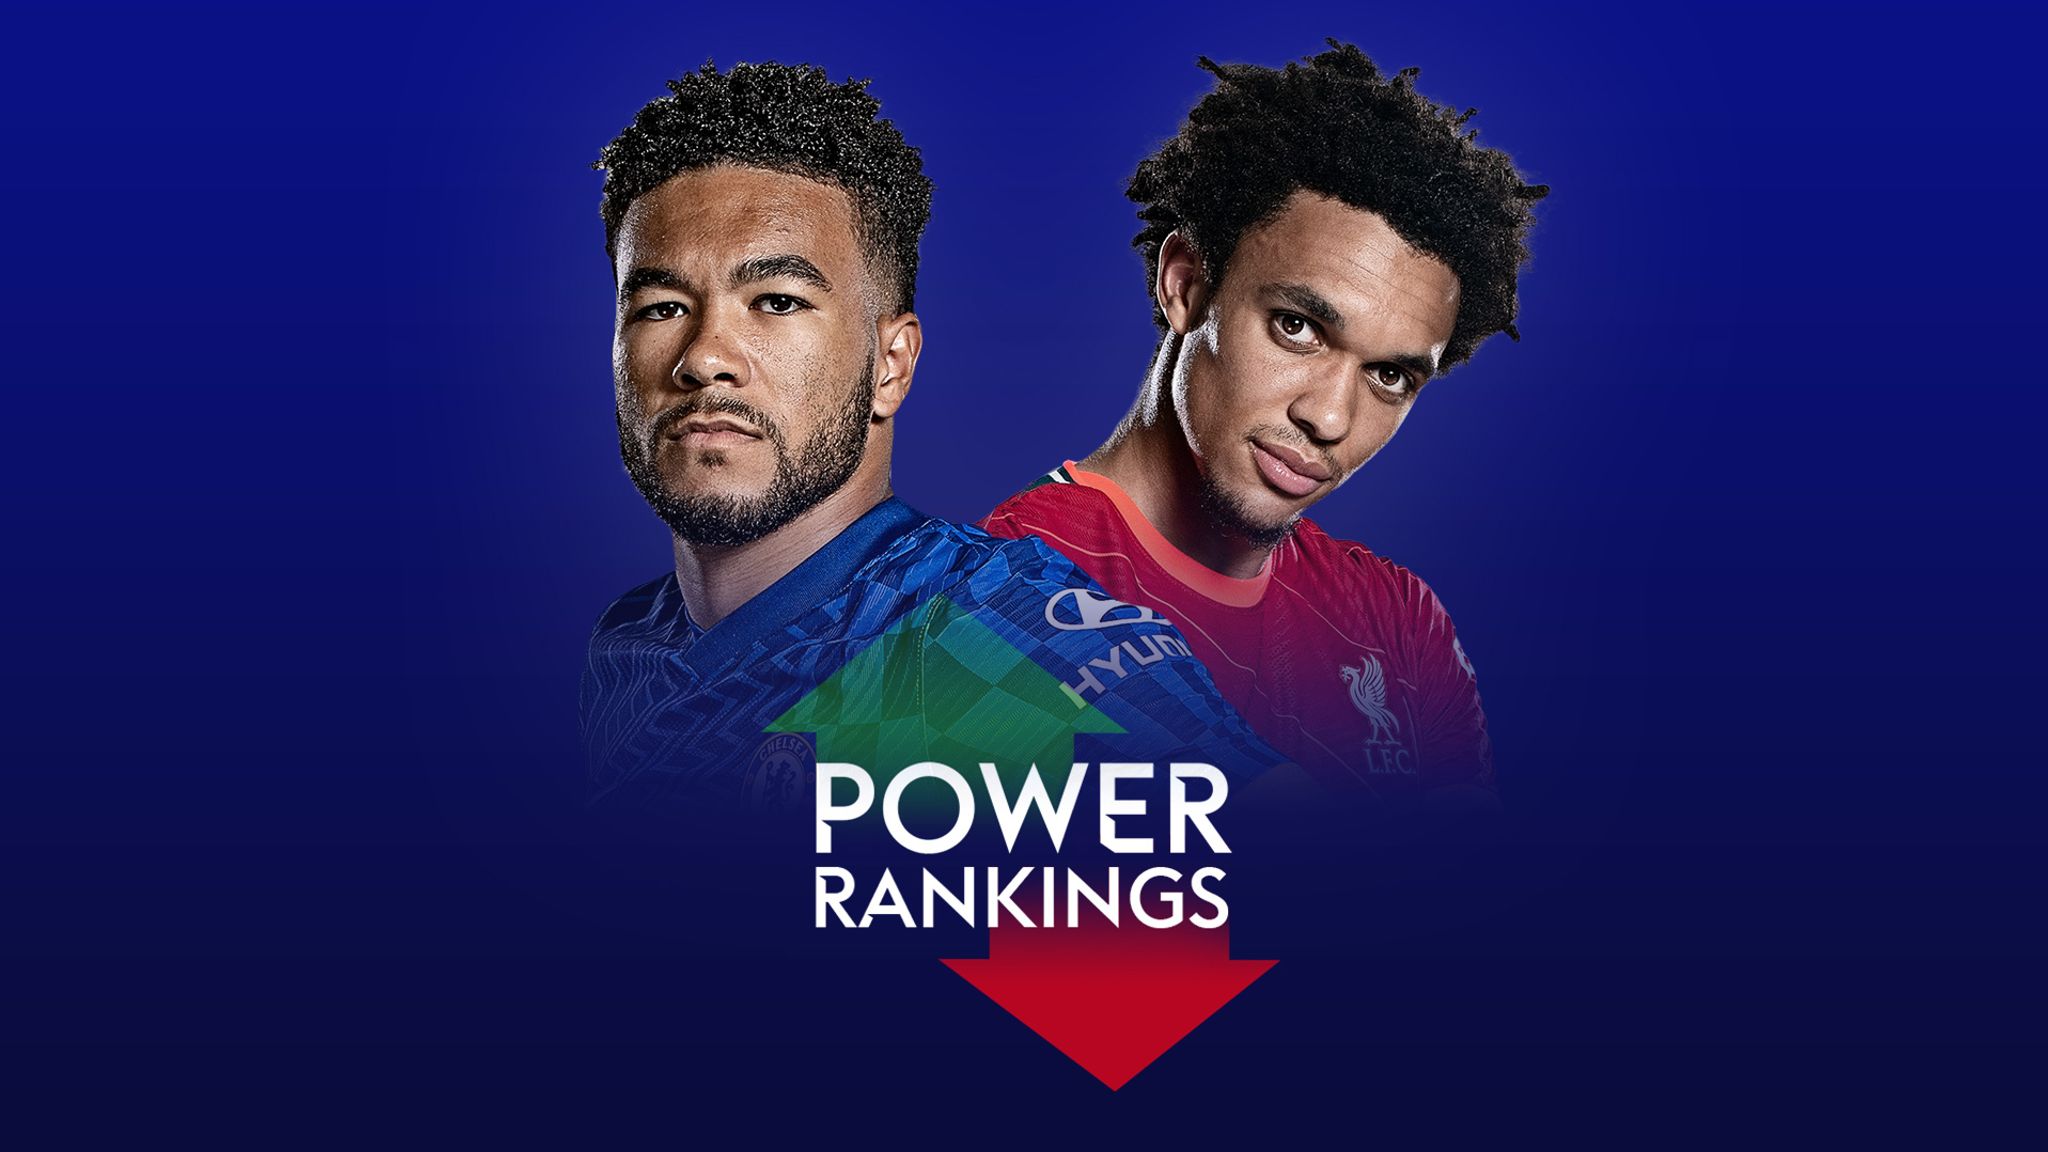 Mohamed Salah pipped by full-backs Reece James and Trent Alexander-Arnold  in Power Rankings form chart | Football News | Sky Sports